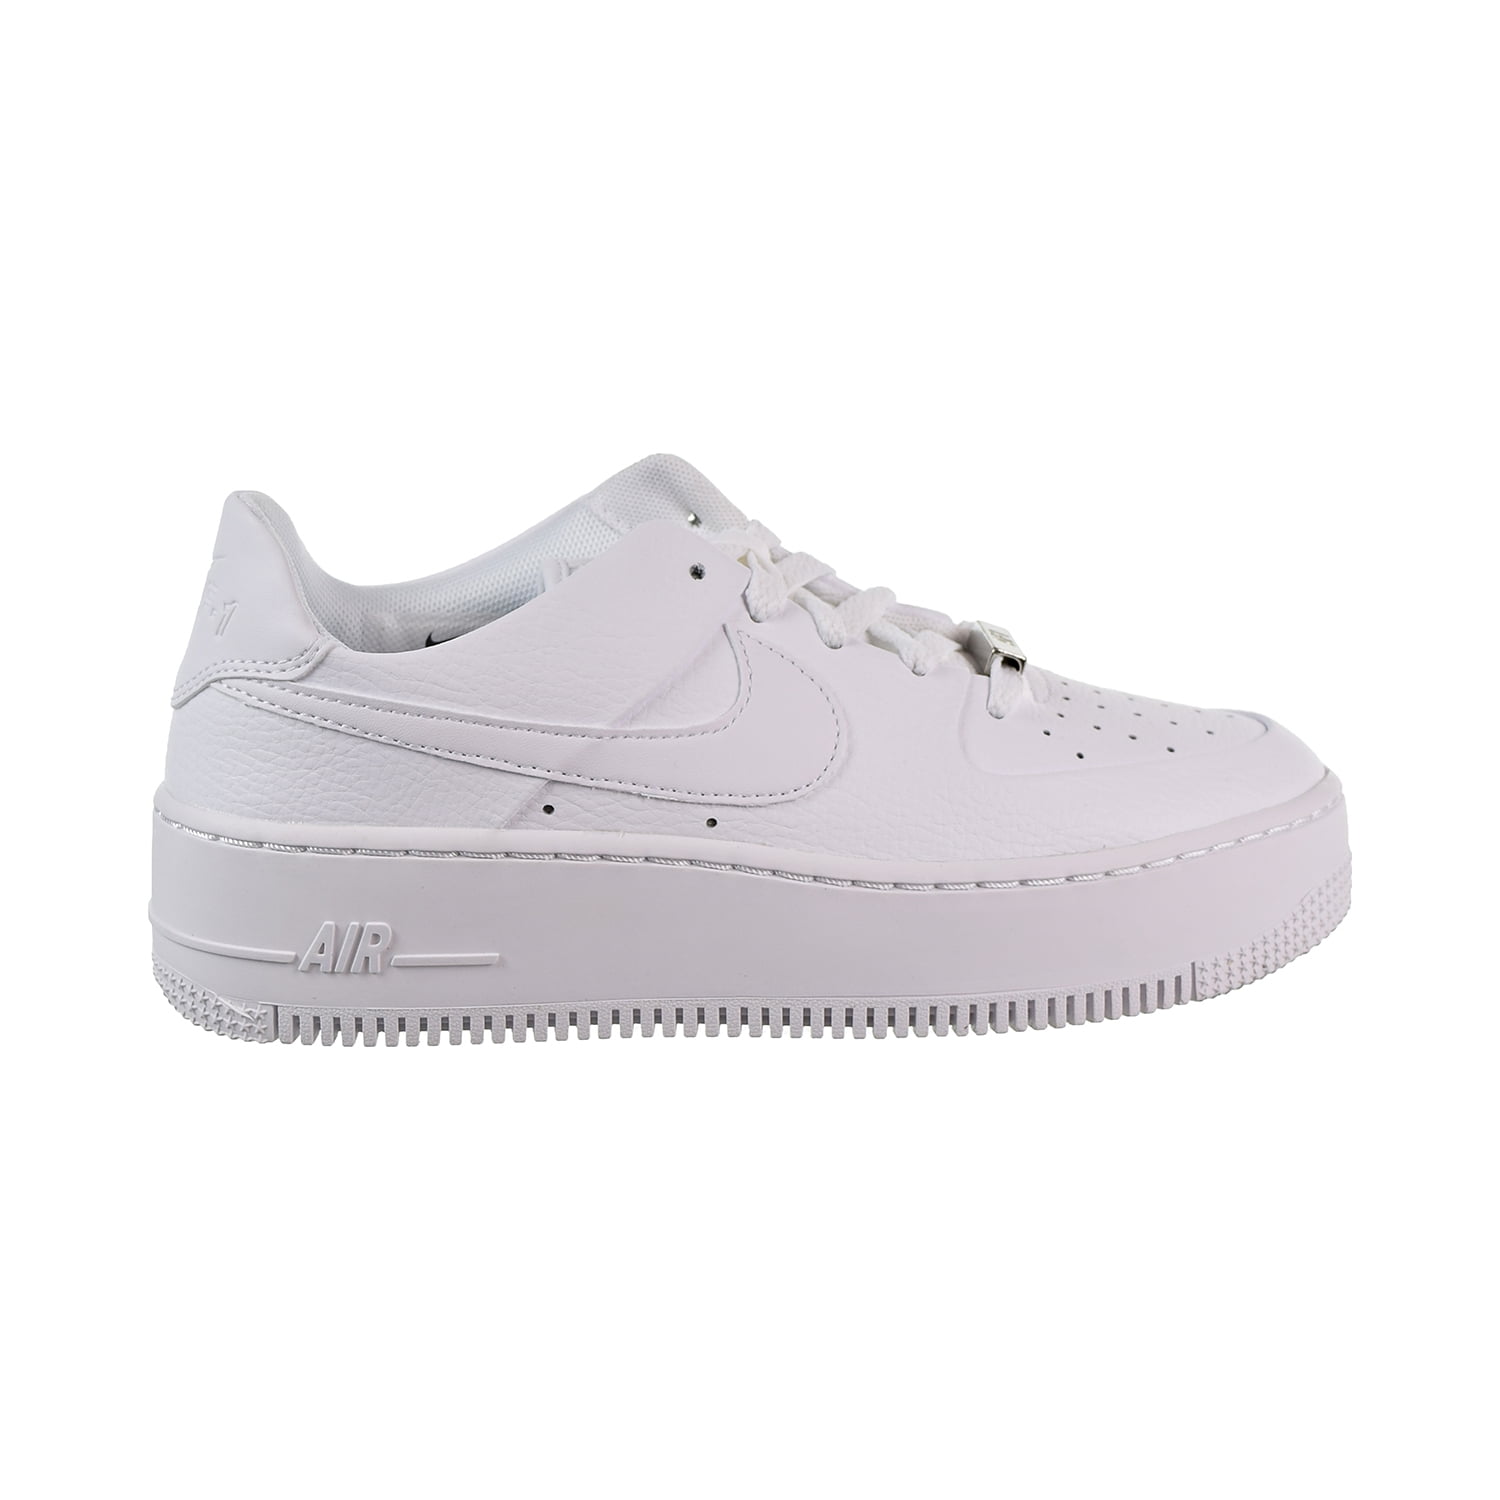 Nike Air Force 1 Sage Low Women's Shoes 